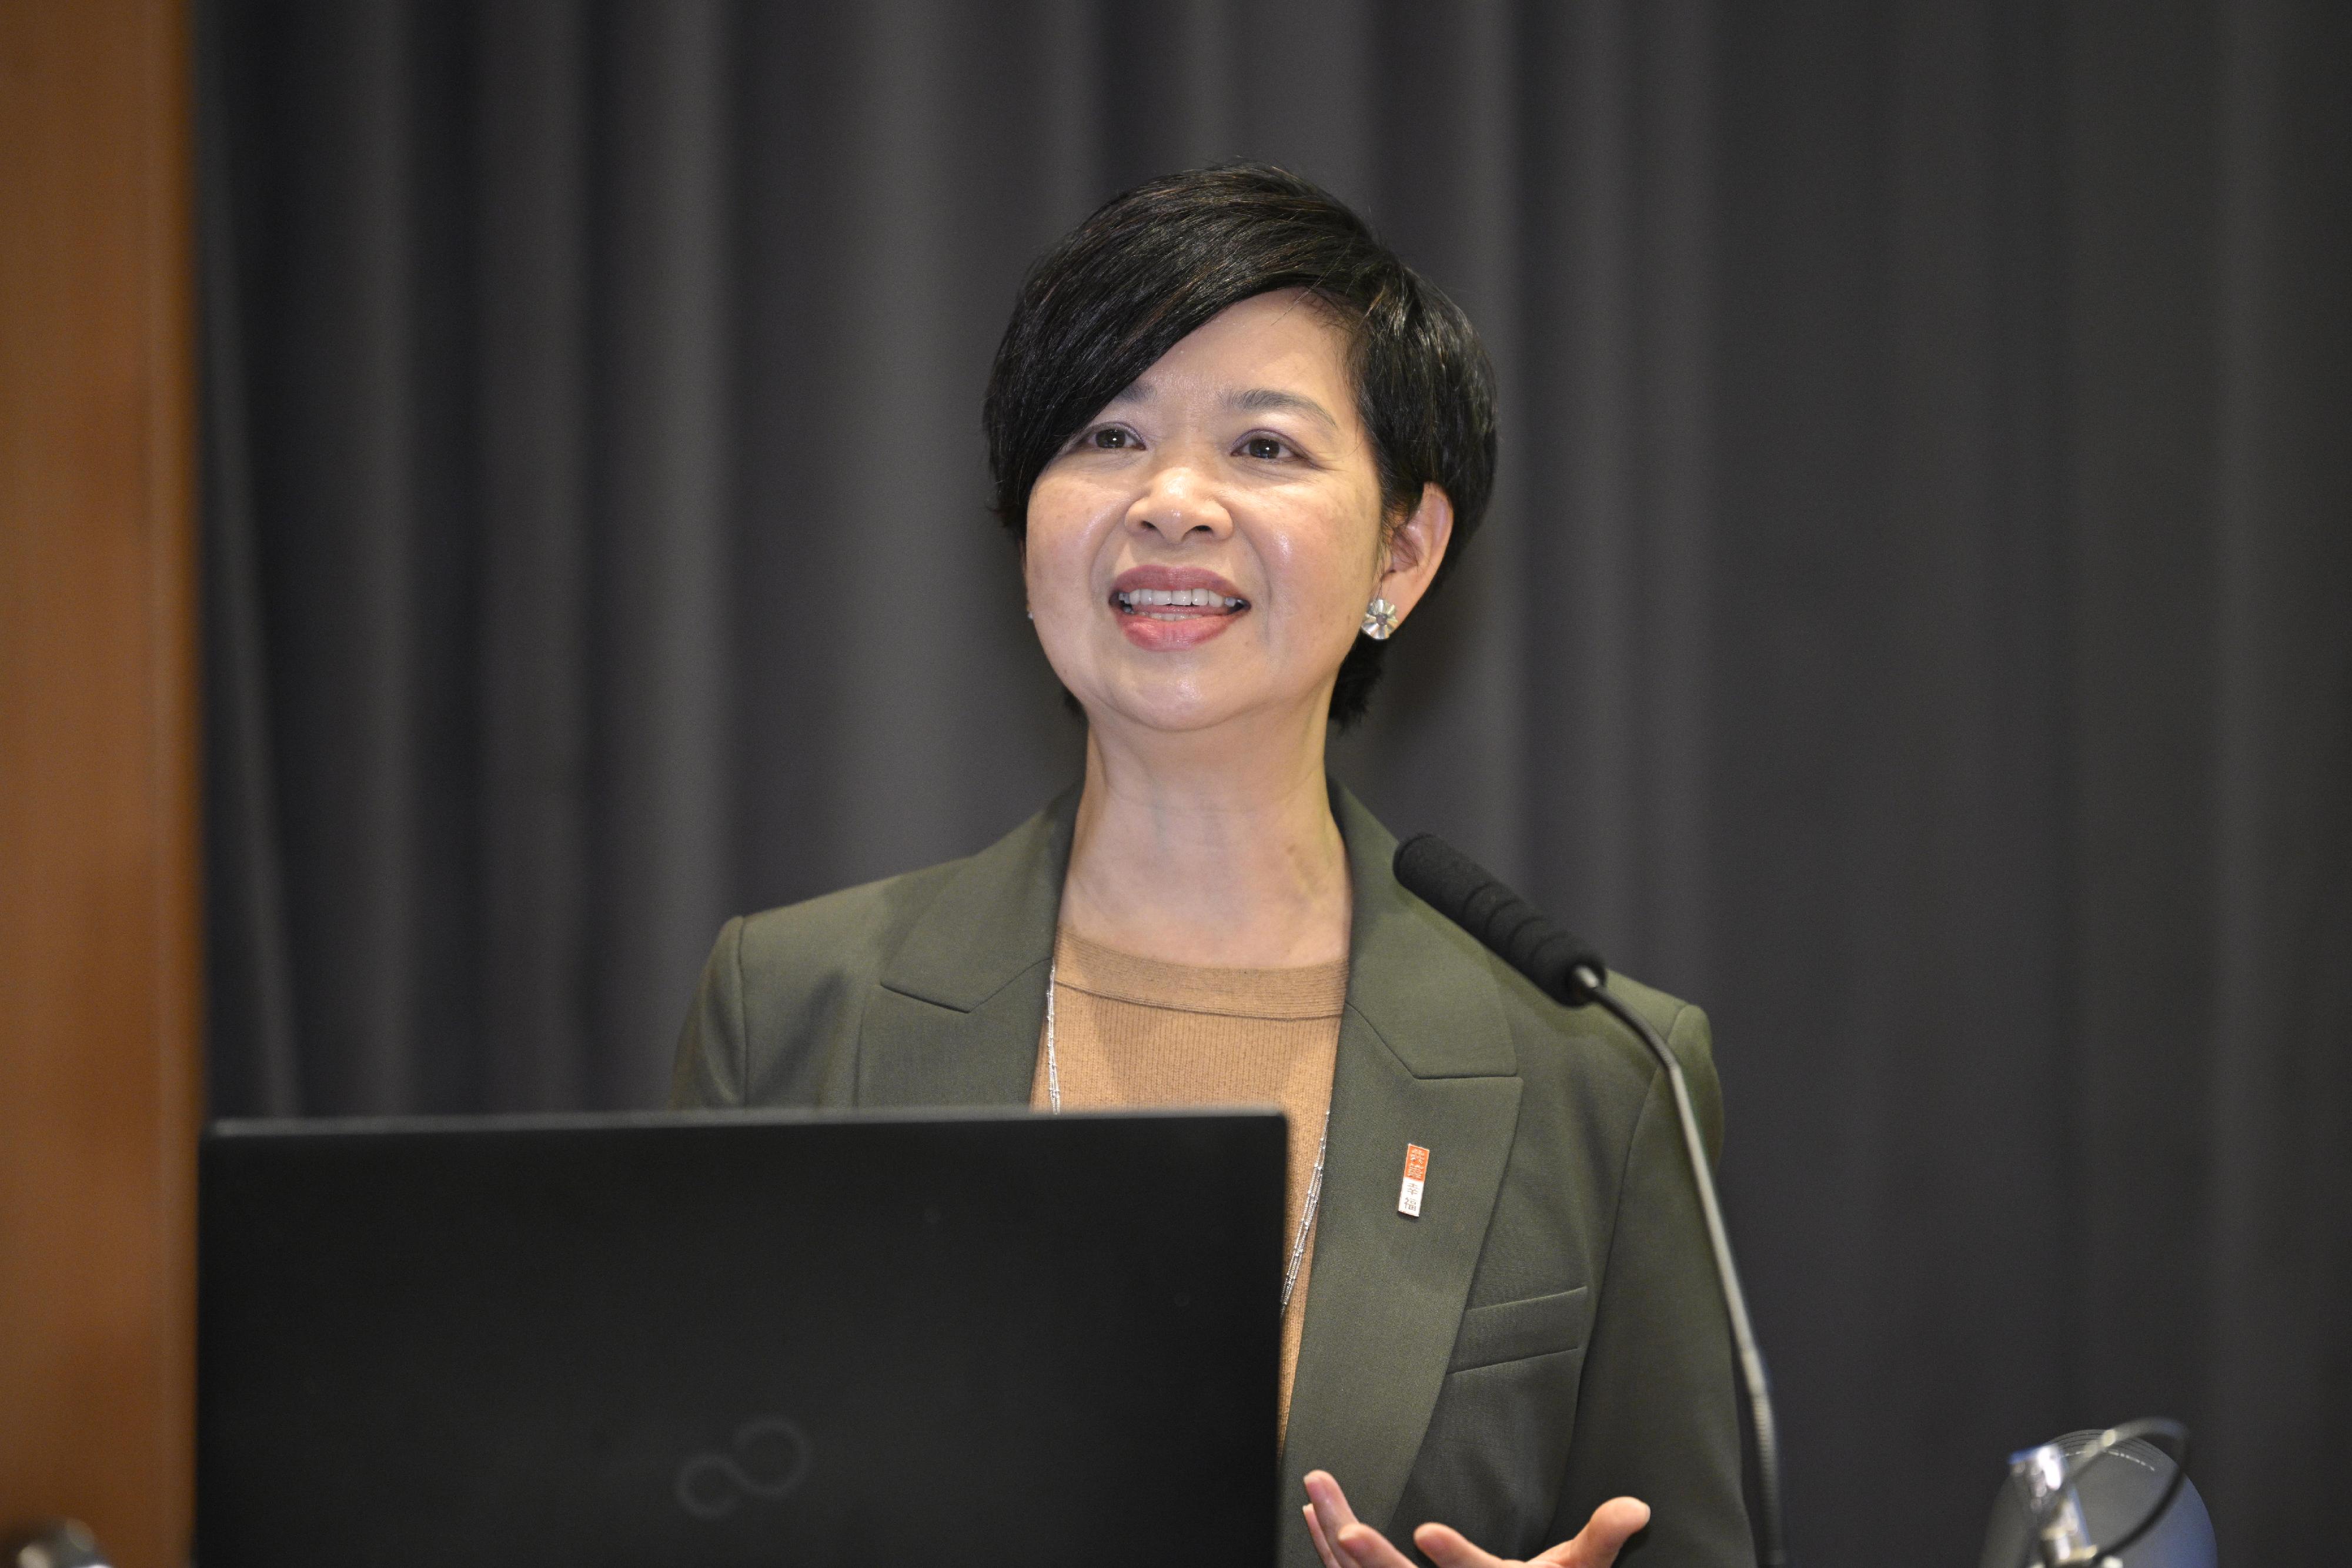 To support Hong Kong Green Week and the Government's initiative in promoting a green economy for sustainable development, the Housing Bureau organised a seminar themed "Leveraging BuildTech and Green Finance in Public Housing" today (February 29). Photo shows the Secretary for Housing, Ms Winnie Ho, delivering her opening remarks.